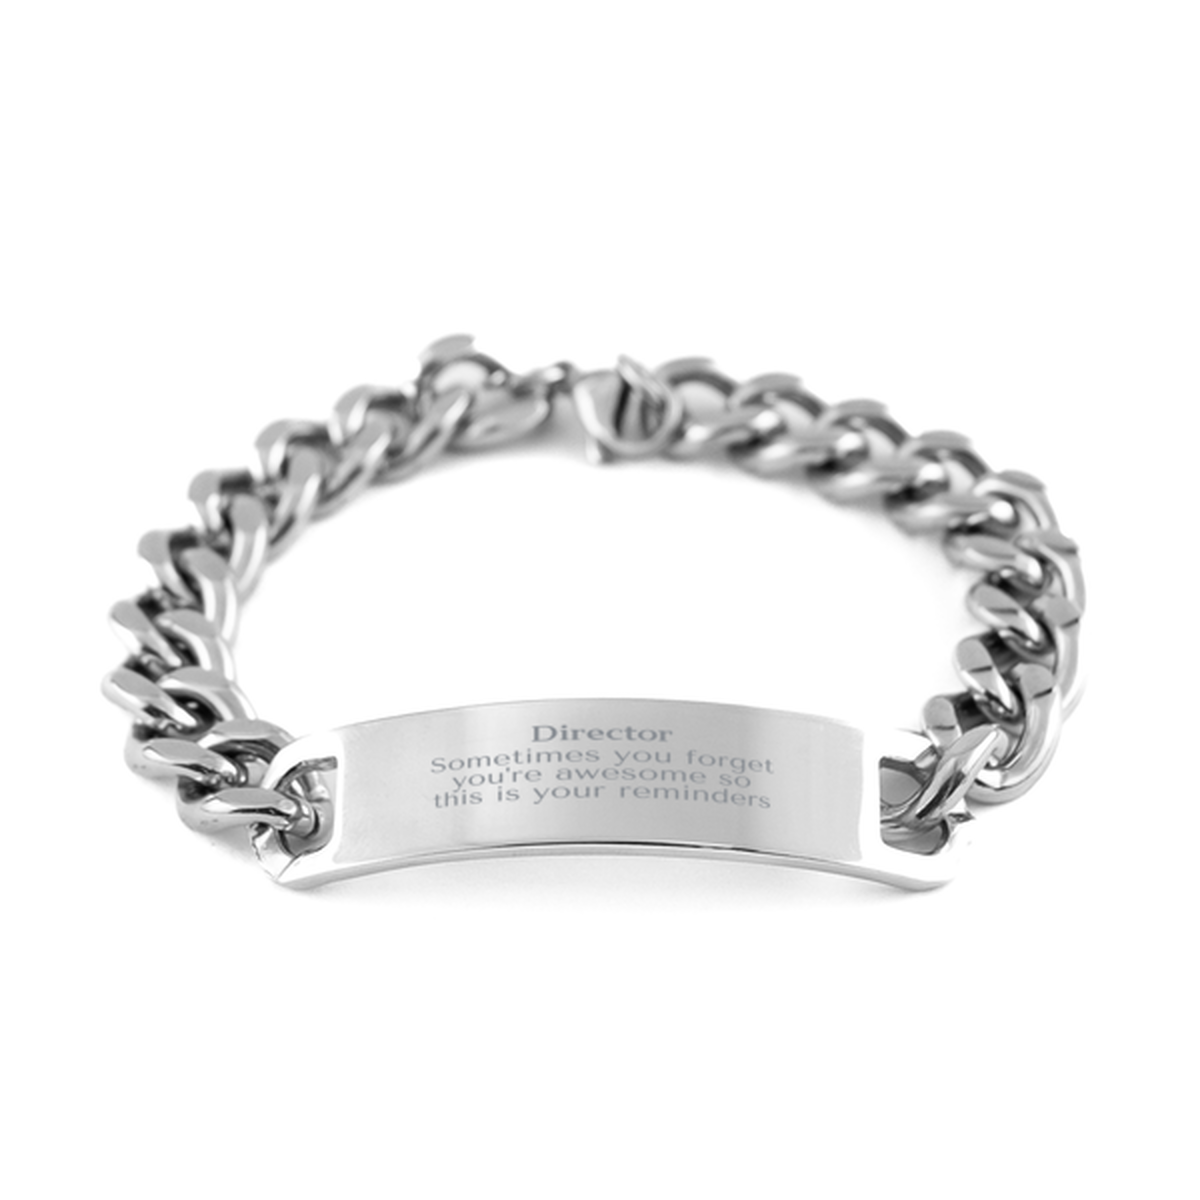 Sentimental Director Cuban Chain Stainless Steel Bracelet, Director Sometimes you forget you're awesome so this is your reminders, Graduation Christmas Birthday Gifts for Director, Men, Women, Coworkers